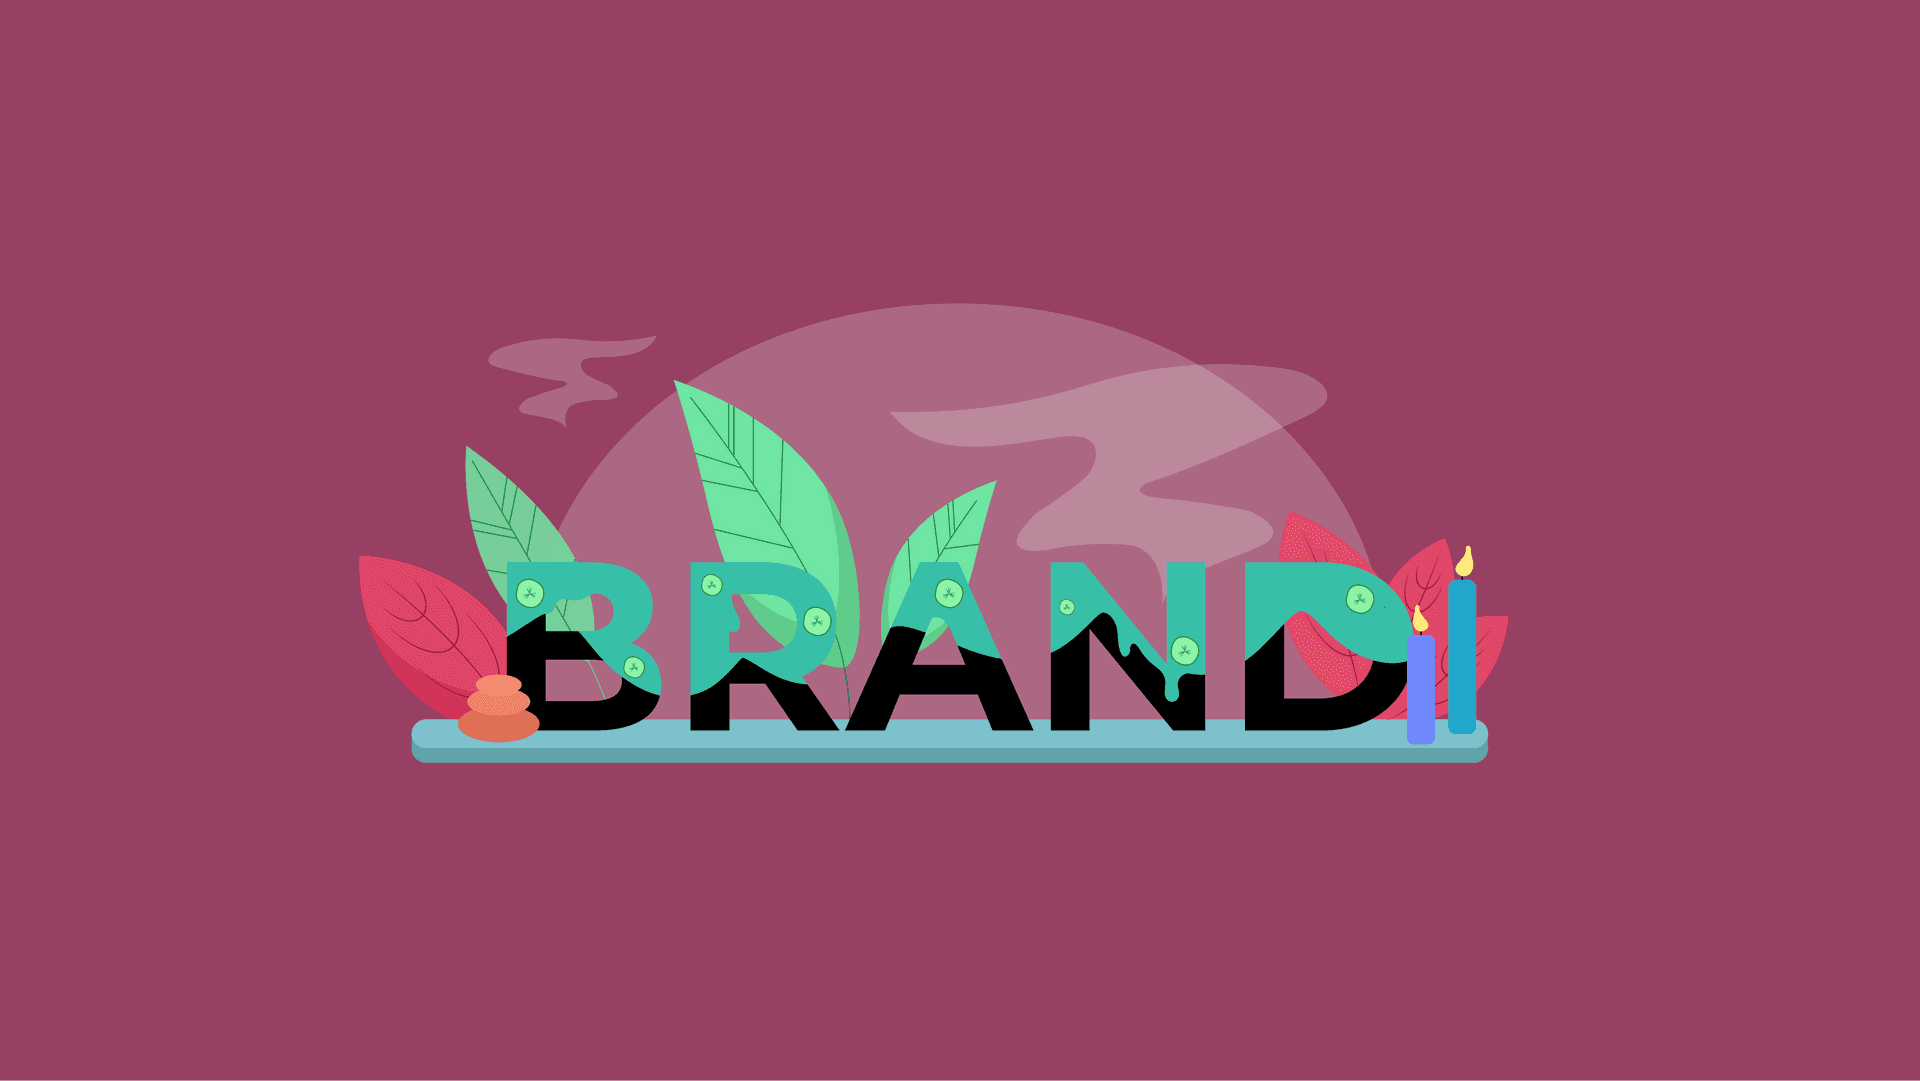 Illustration of the word Brand being pampered